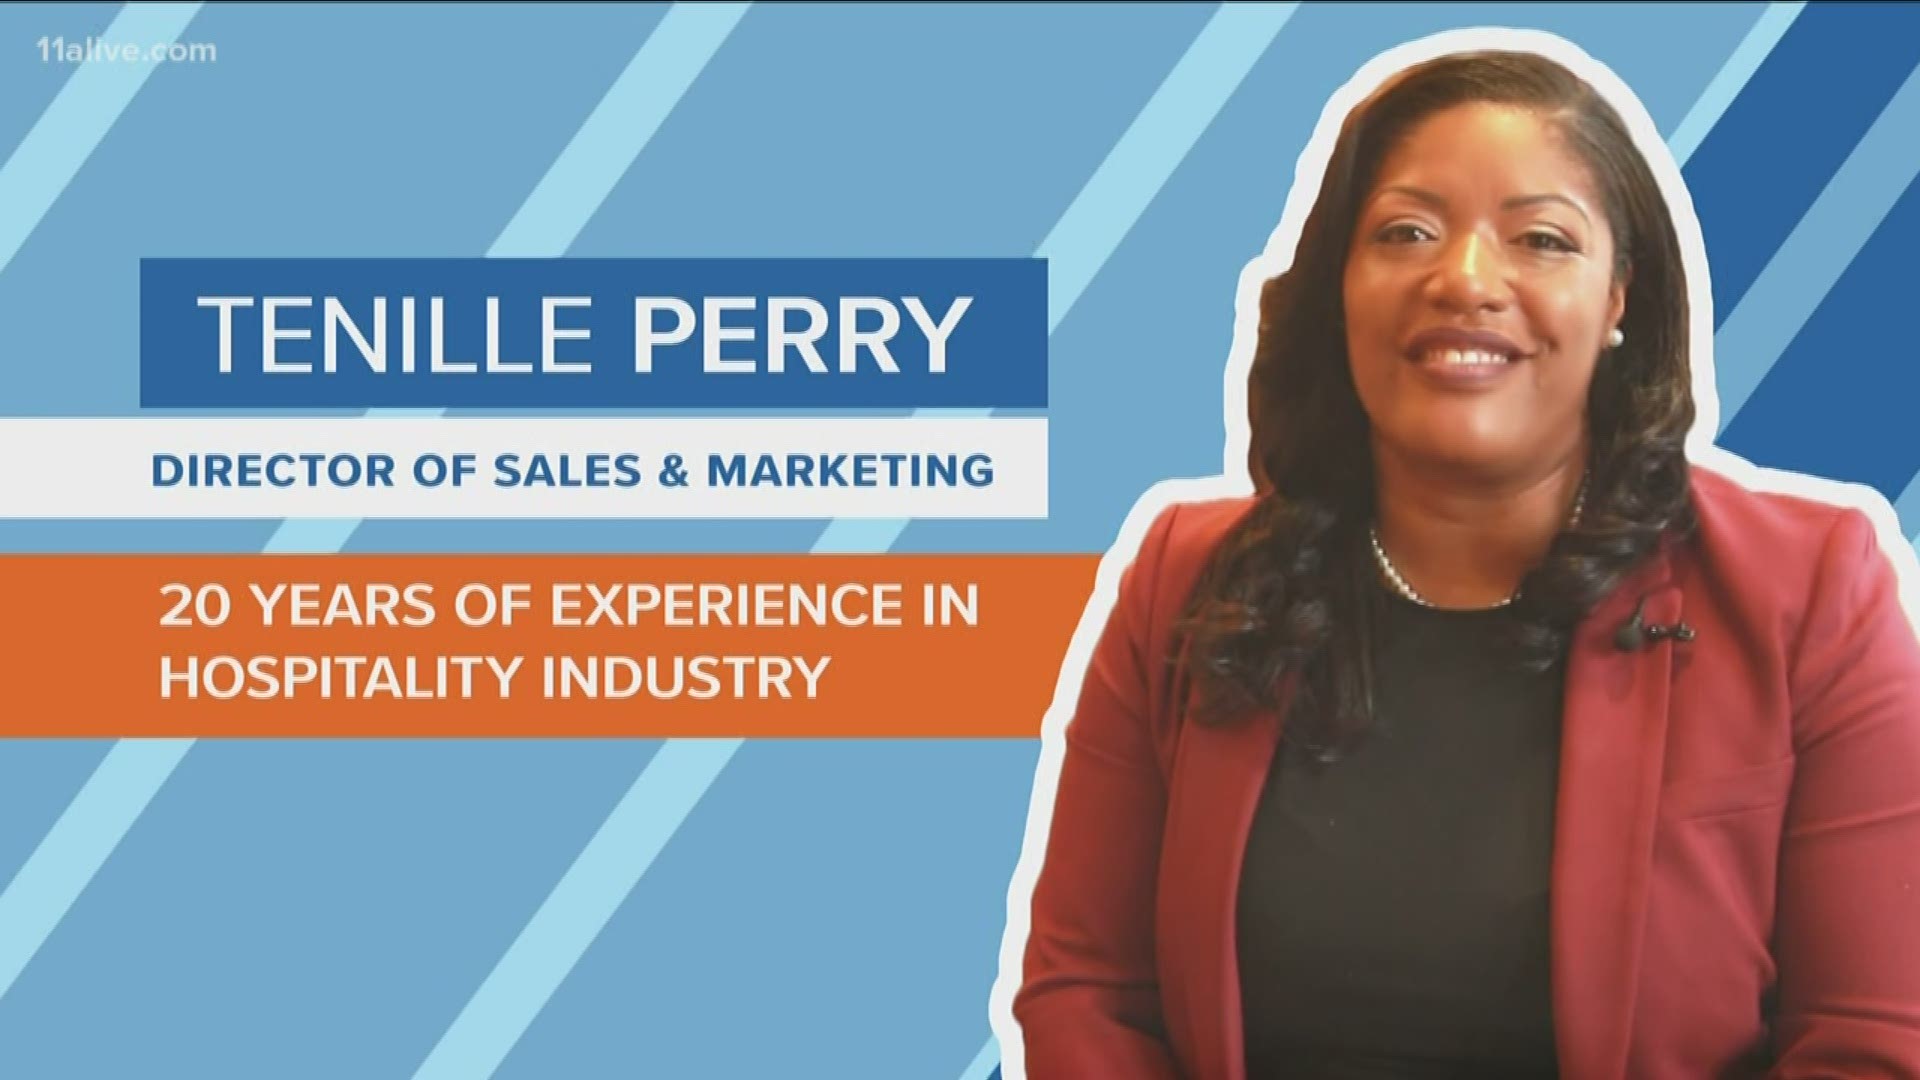 Tenille Perry is the director of sales and marketing at Atlanta's Ellis Hotel. Here are her pro tips for maxing out your hotel stay.